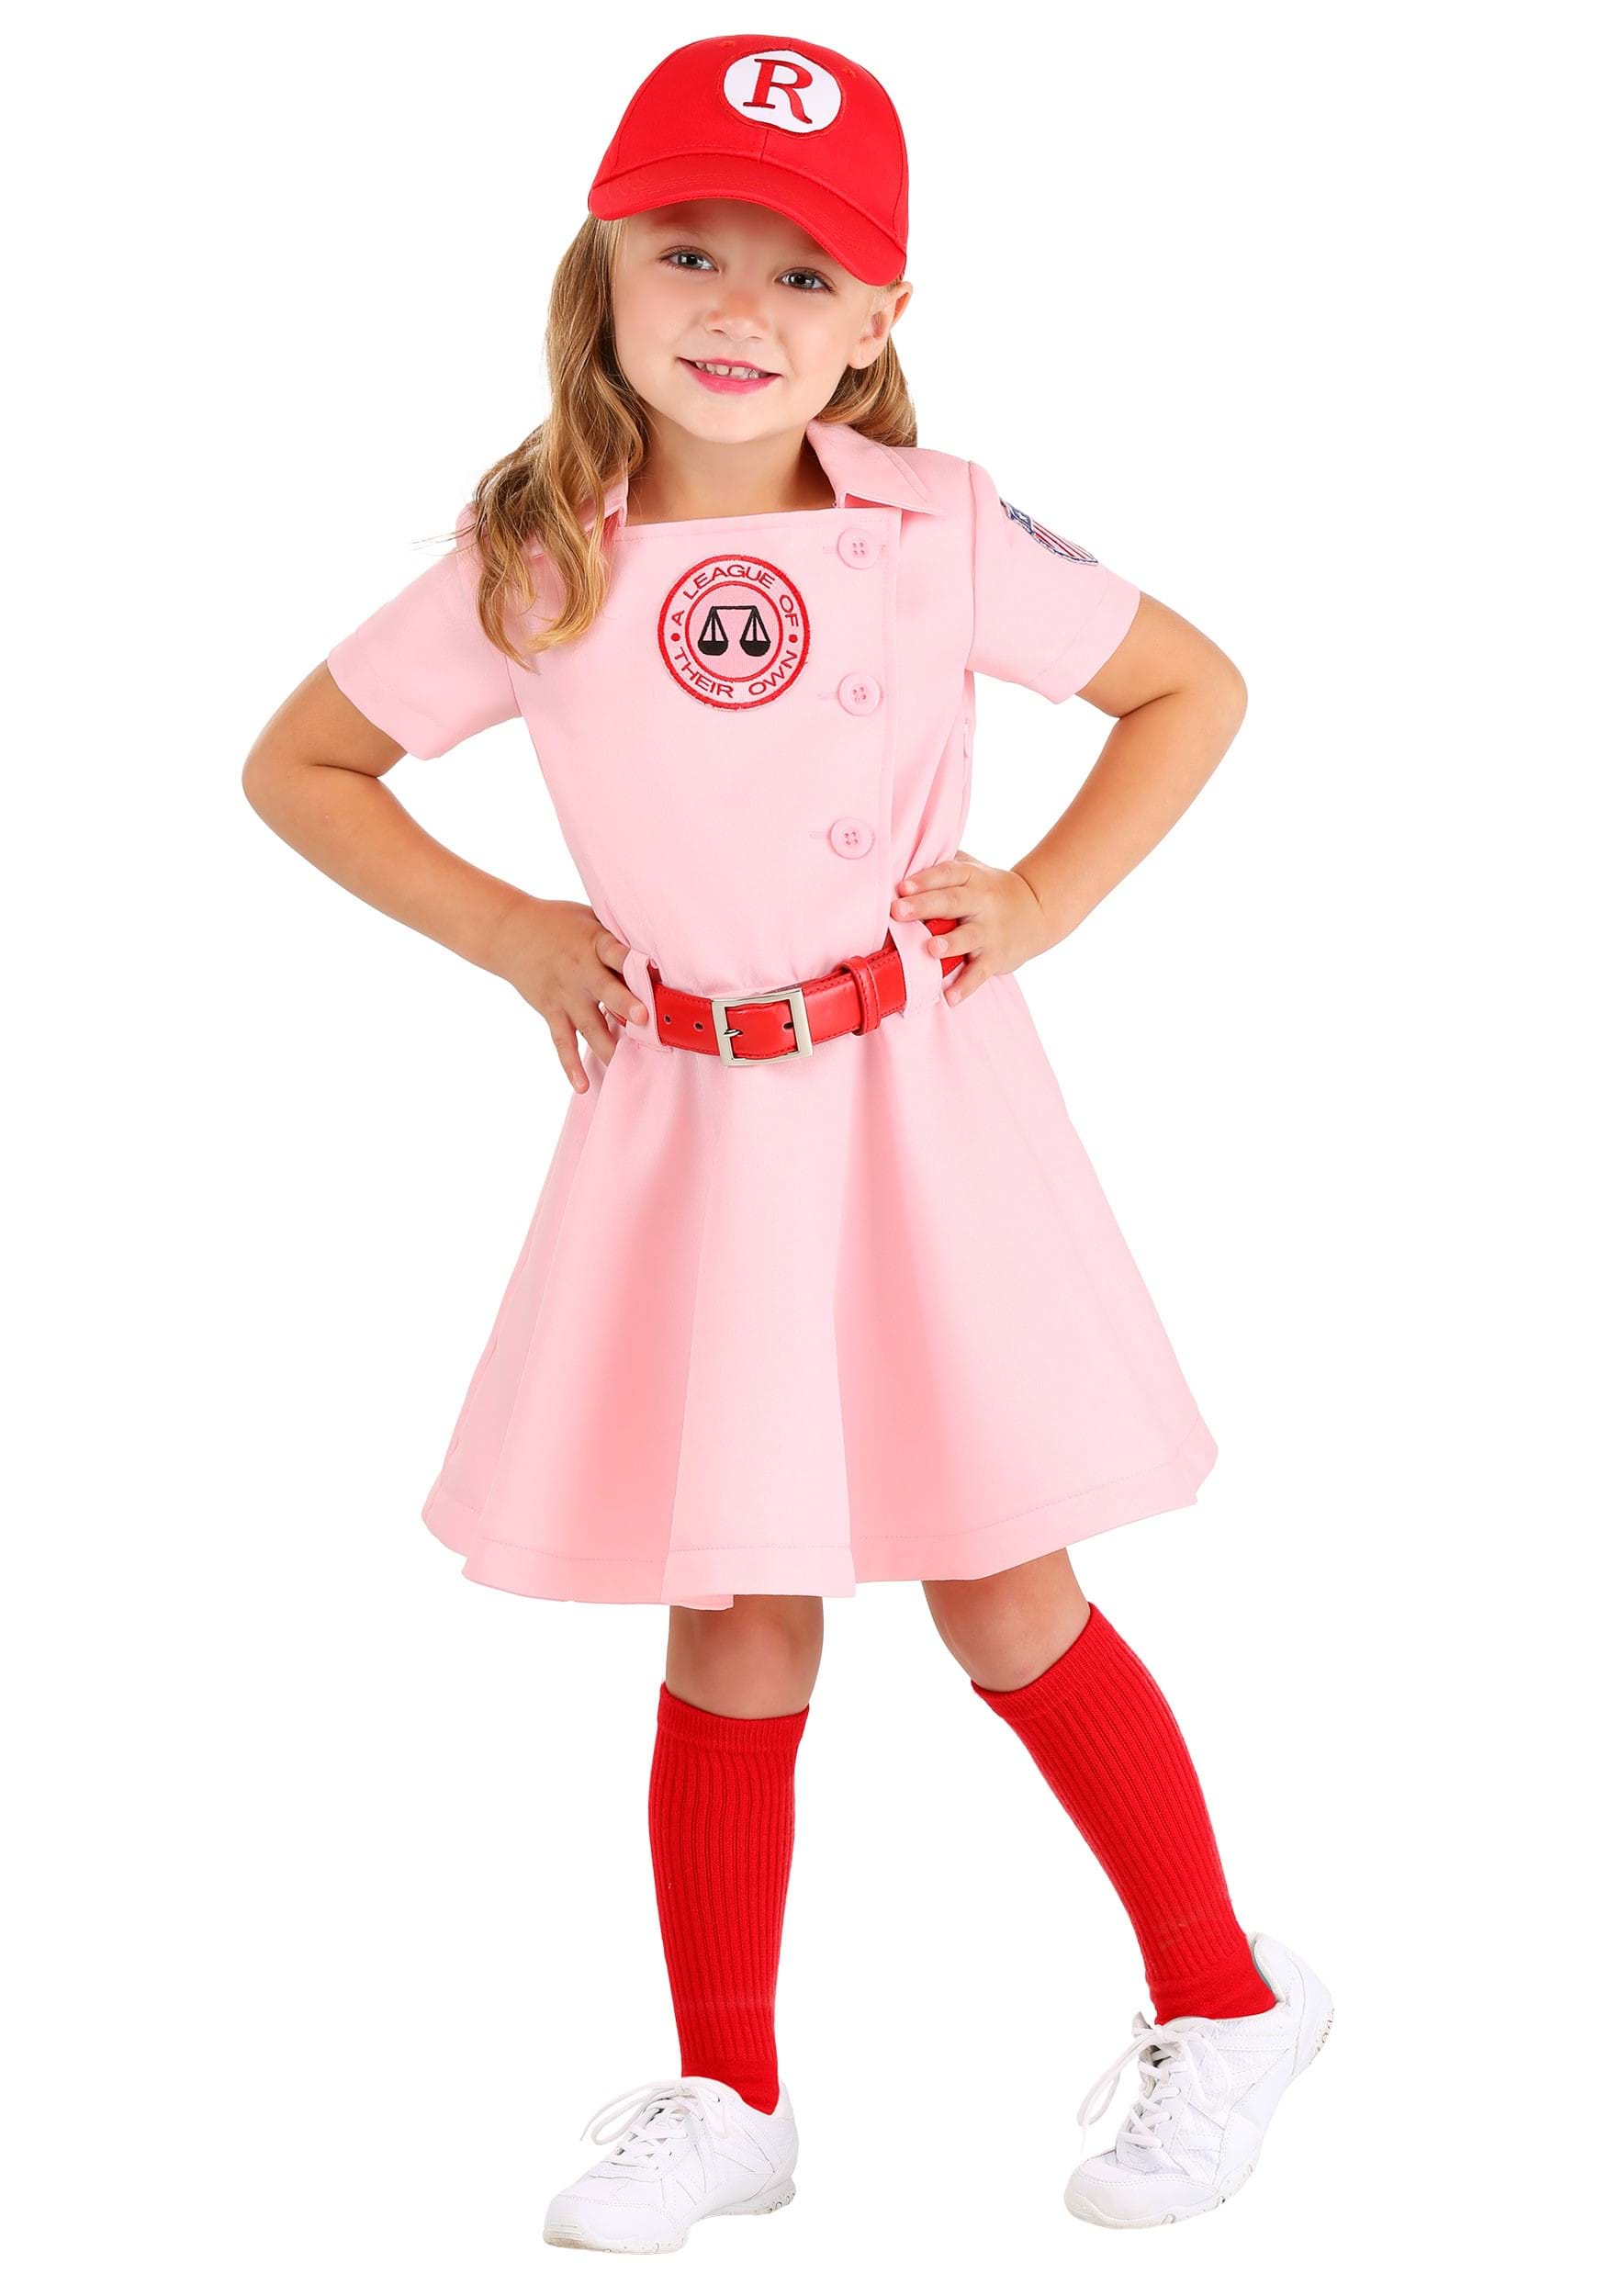 Photos - Fancy Dress League FUN Costumes  of Their Own Dottie Luxury Costume for Toddler Pink 